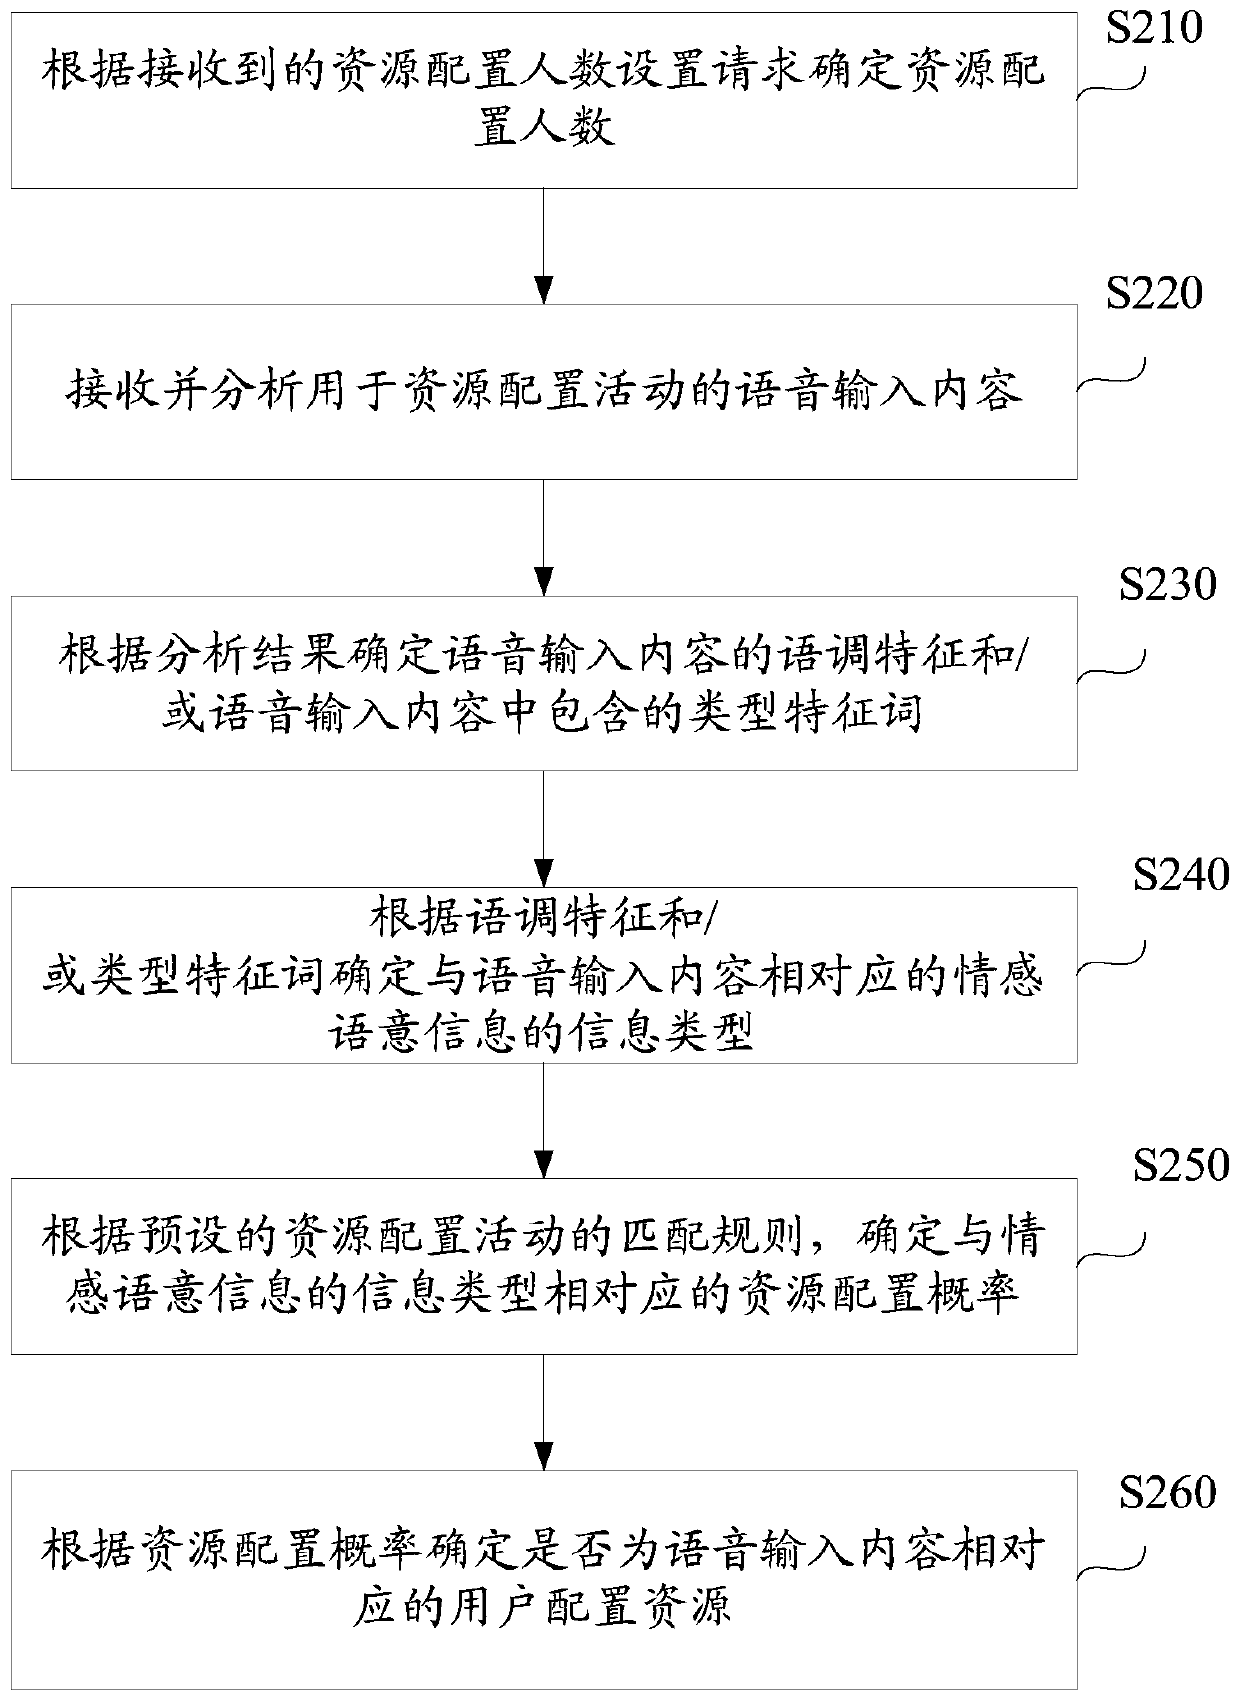 Voice-based resource allocation method and system